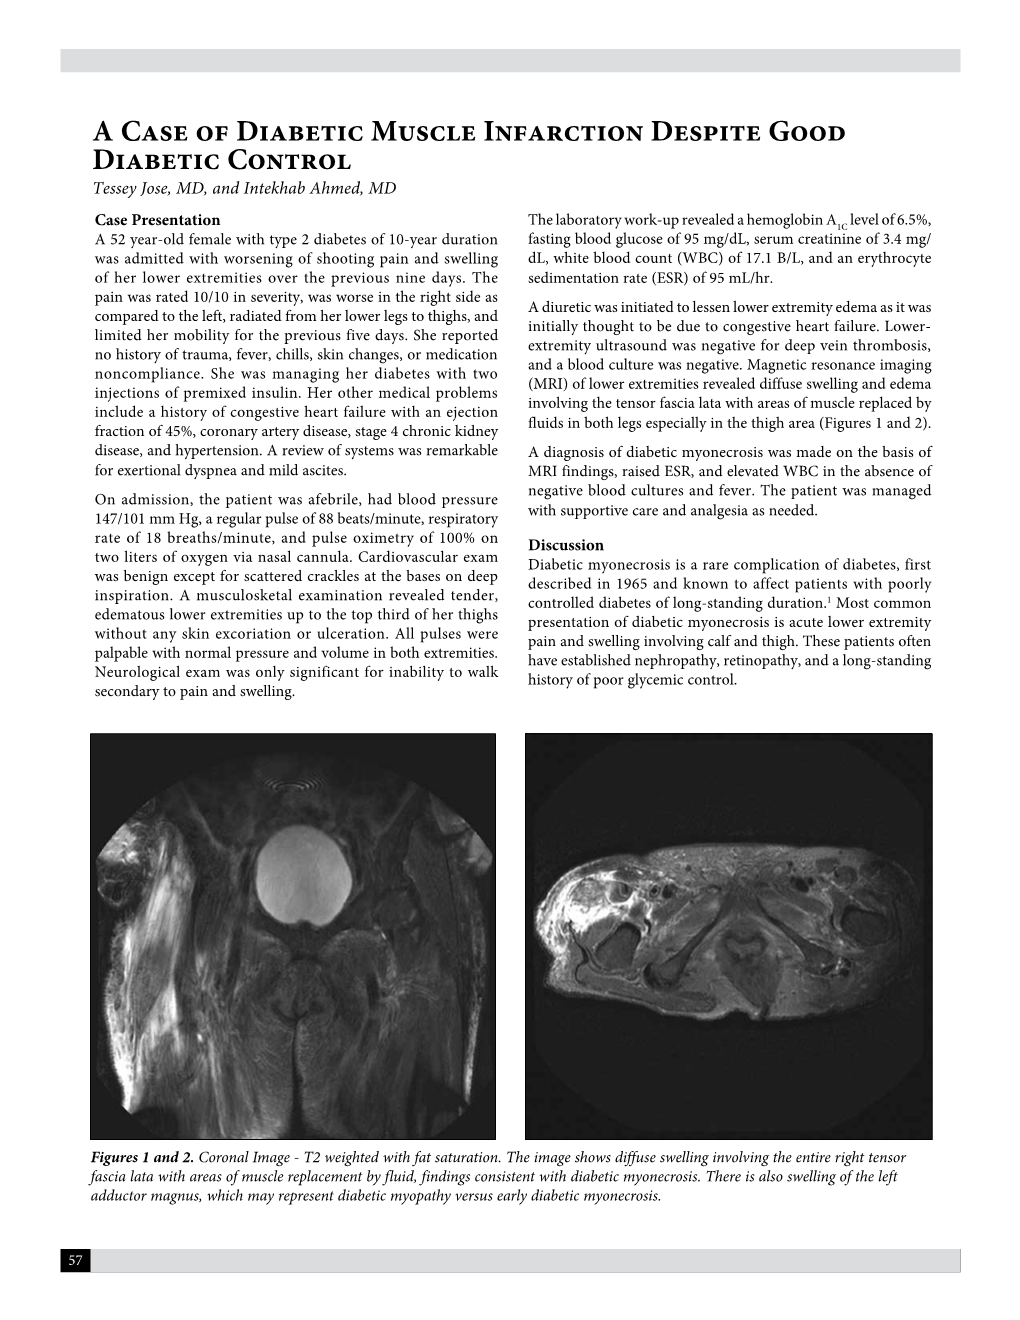 A Case of Diabetic Muscle Infarction Despite Good Diabetic Control Tessey Jose, MD, and Intekhab Ahmed, MD